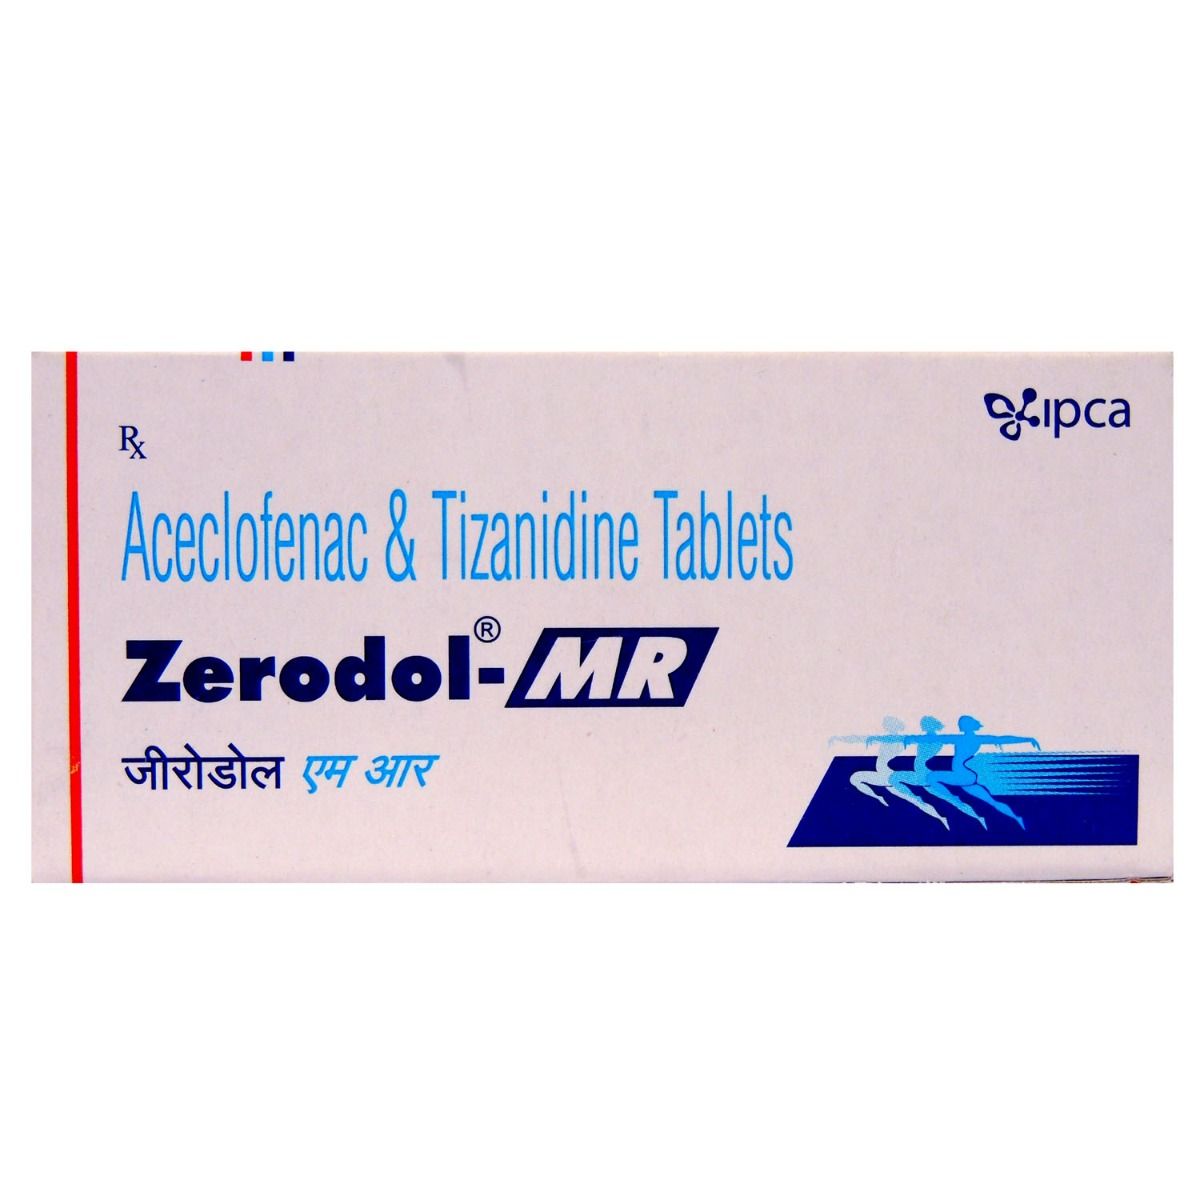 Zerodol-MR Tablet 10's Price, Uses, Side Effects, Composition - Apollo